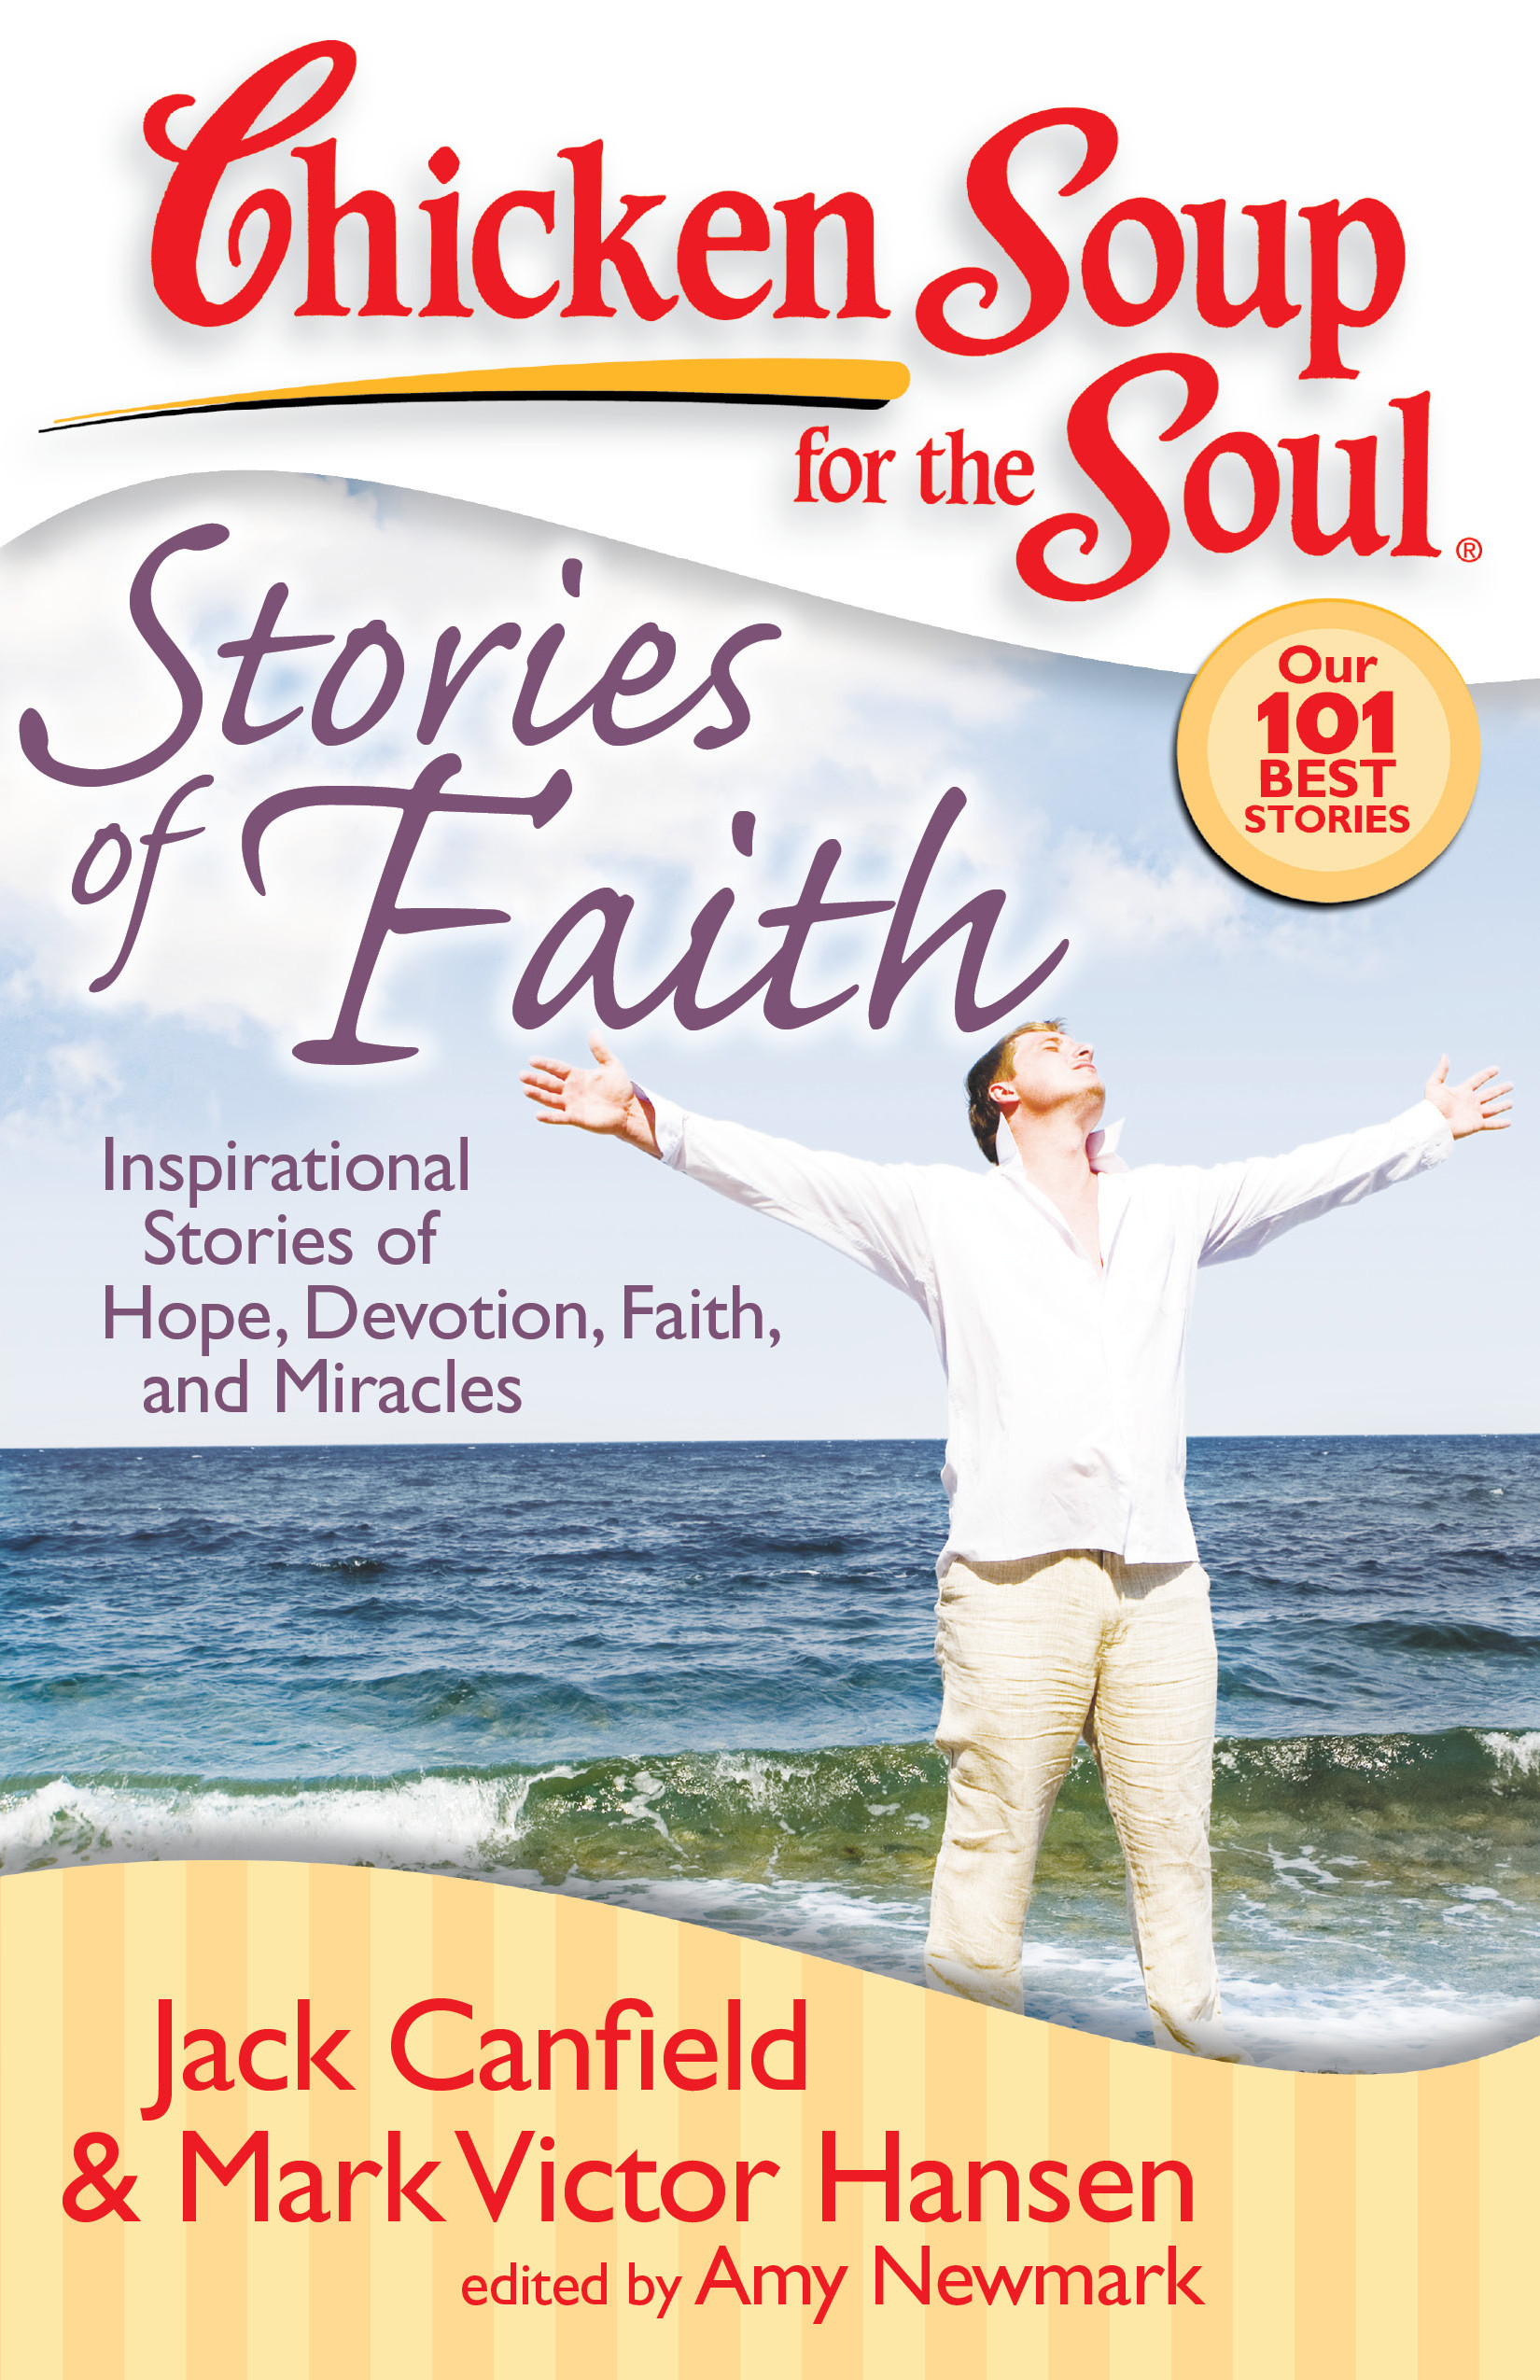 Chicken soup for the soul Stories Lovely Chicken soup for the soul Stories Of Faith